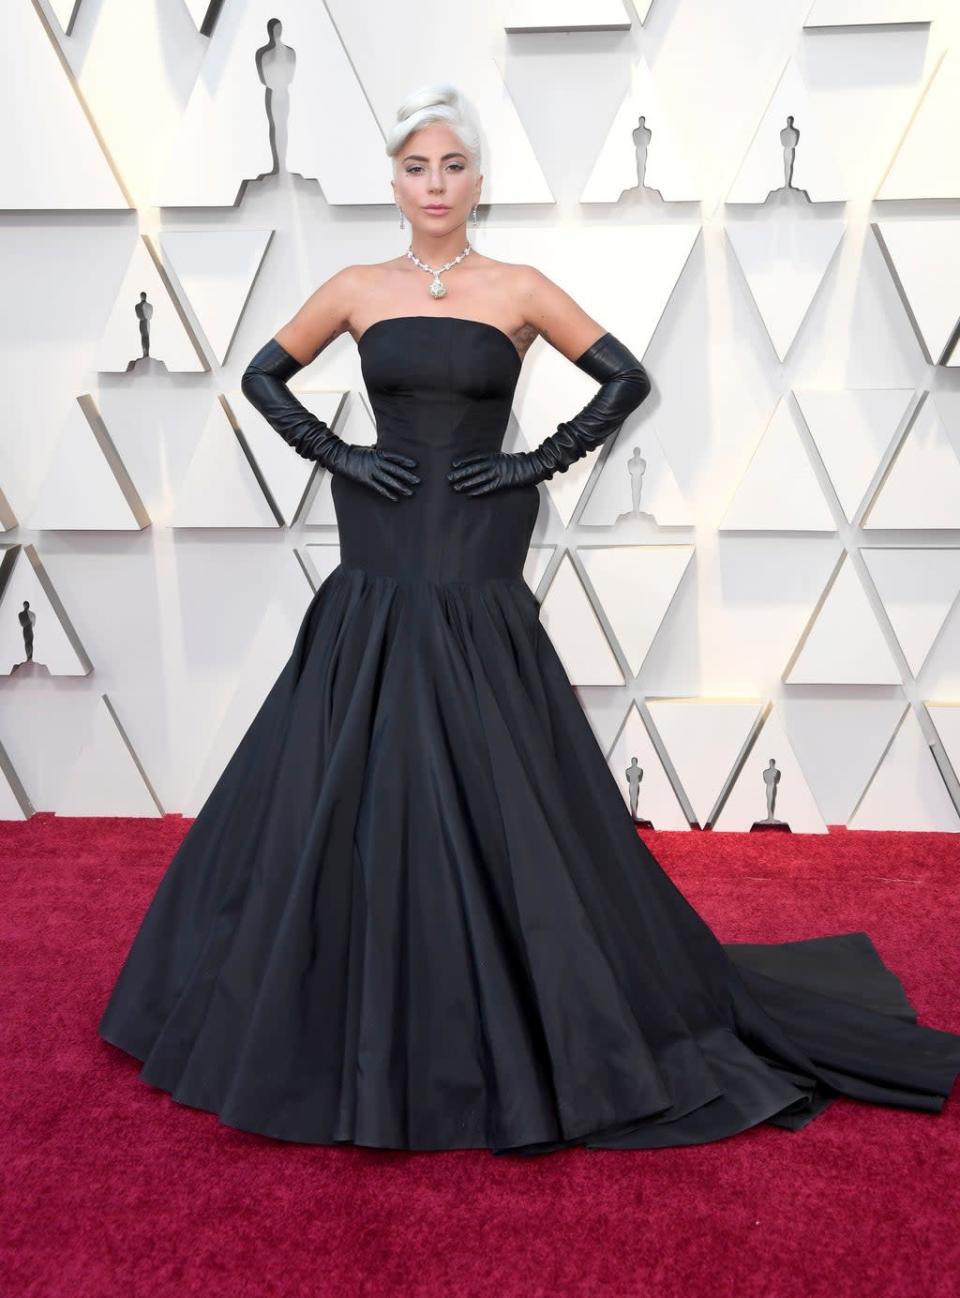 Lady Gaga attends the 2019 Oscars (Getty Images)